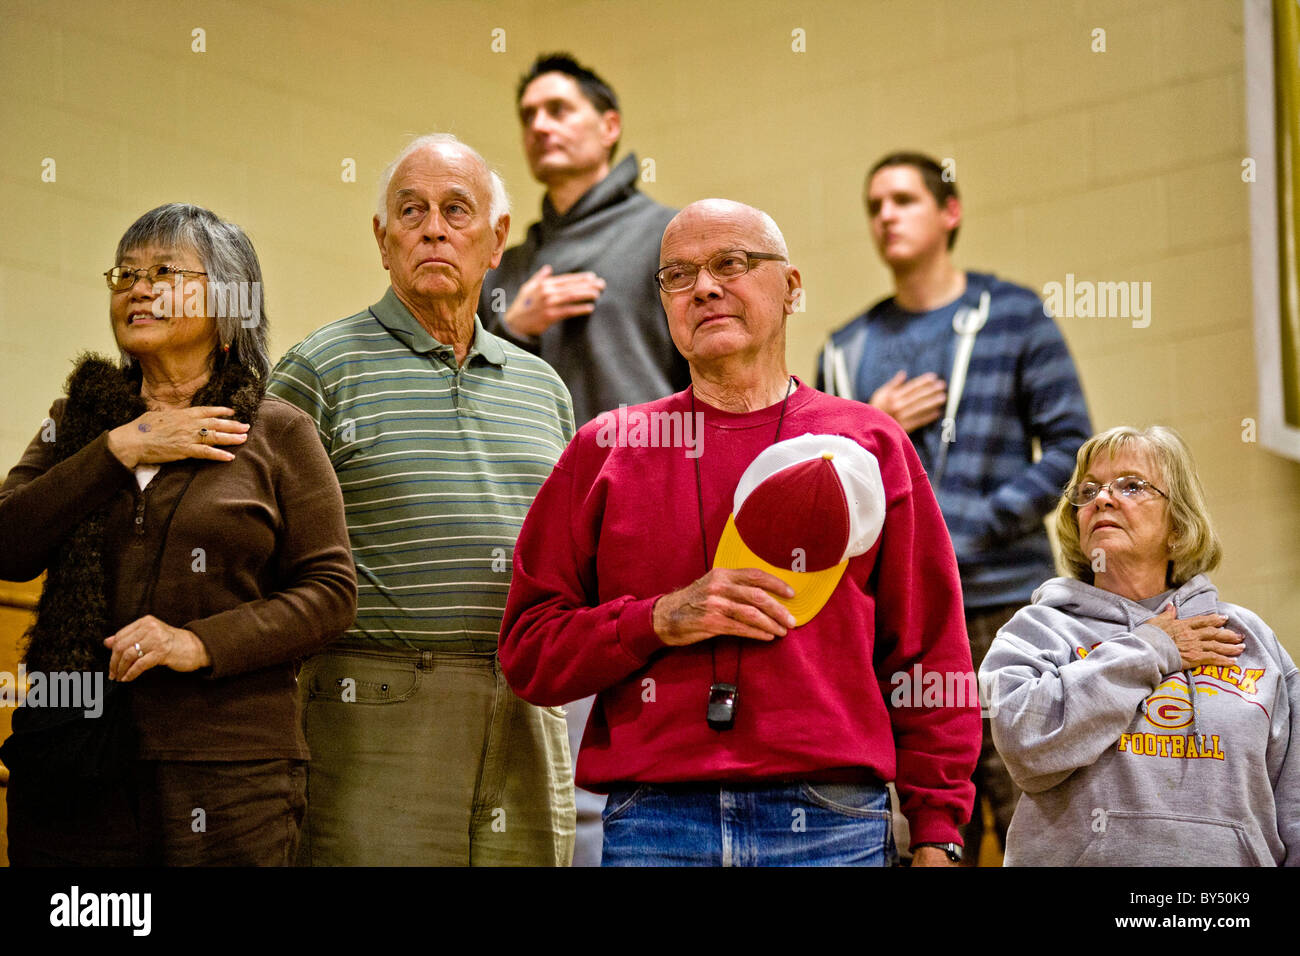 With one sour exception, students and staff make the Pledge of Allegiance  basketball game in a gymnasium in Southern California Stock Photo